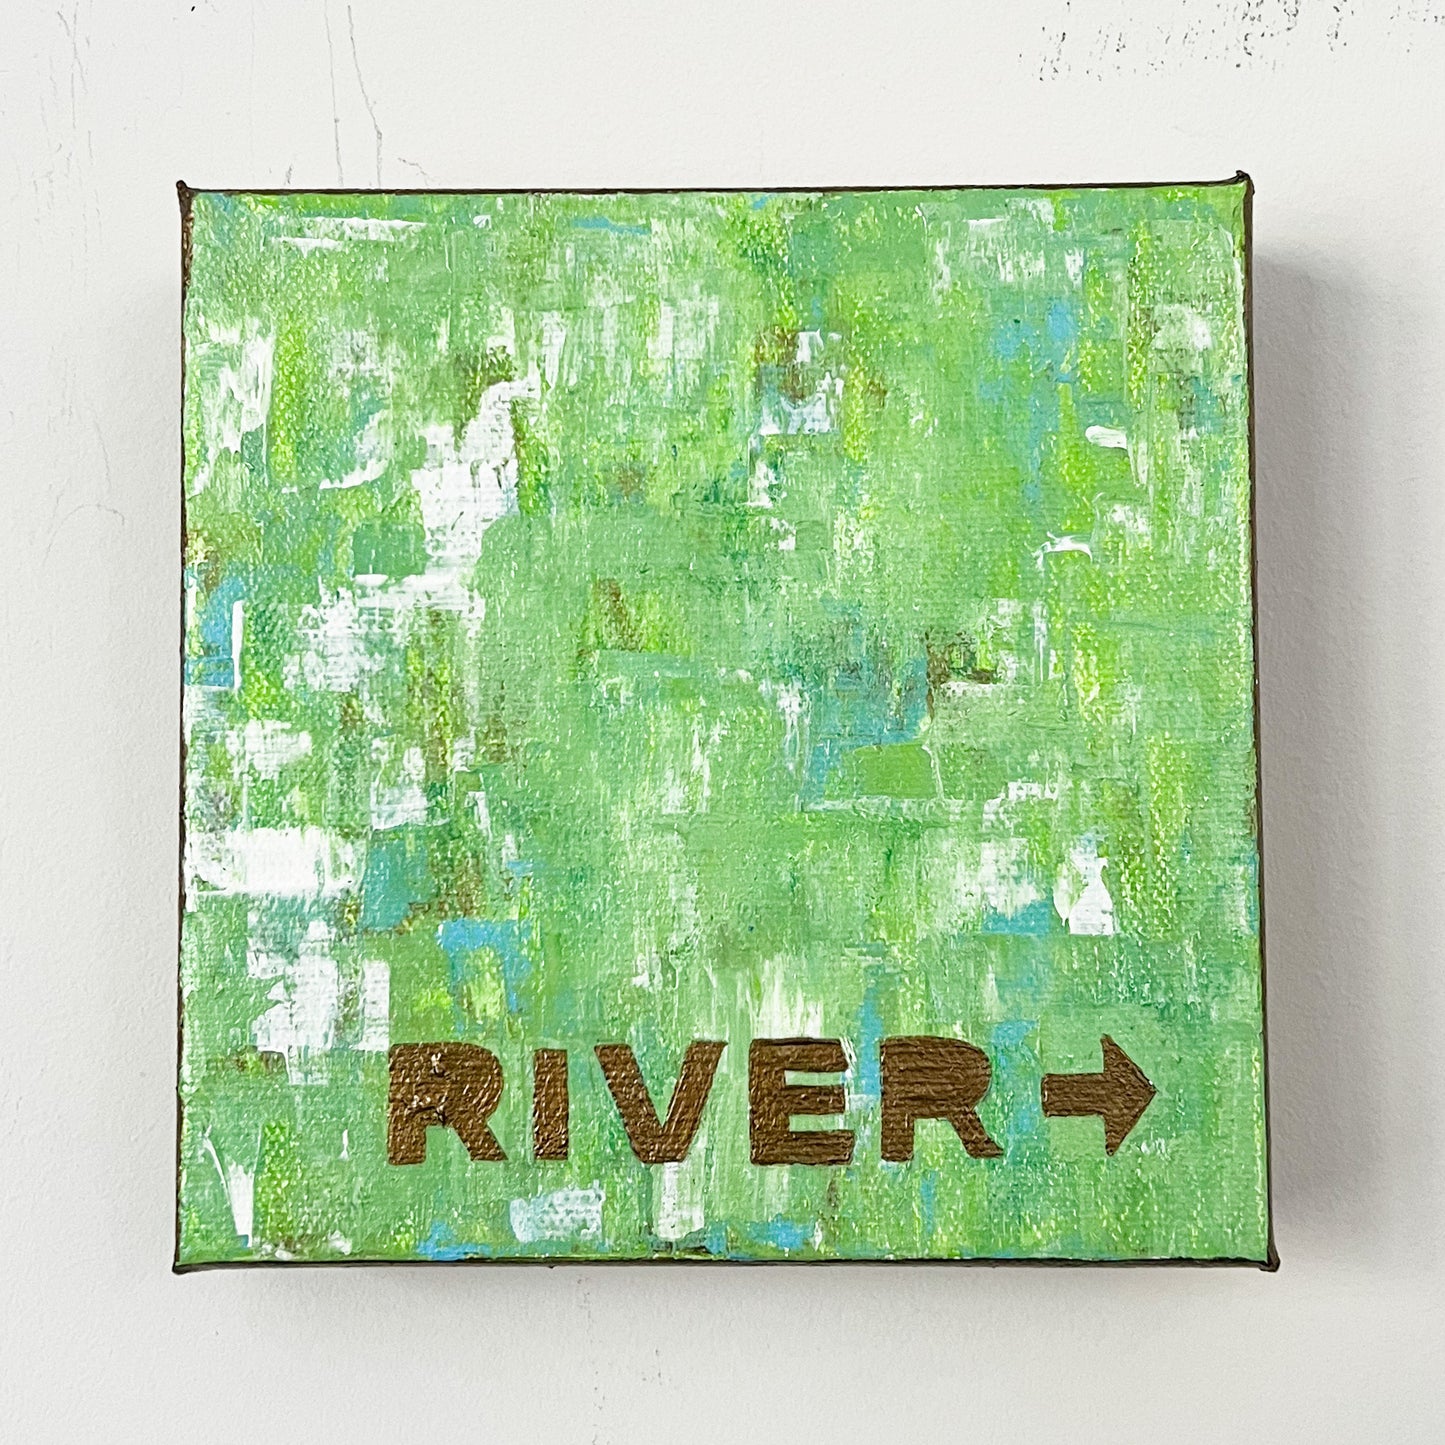 To The River, 6x6"